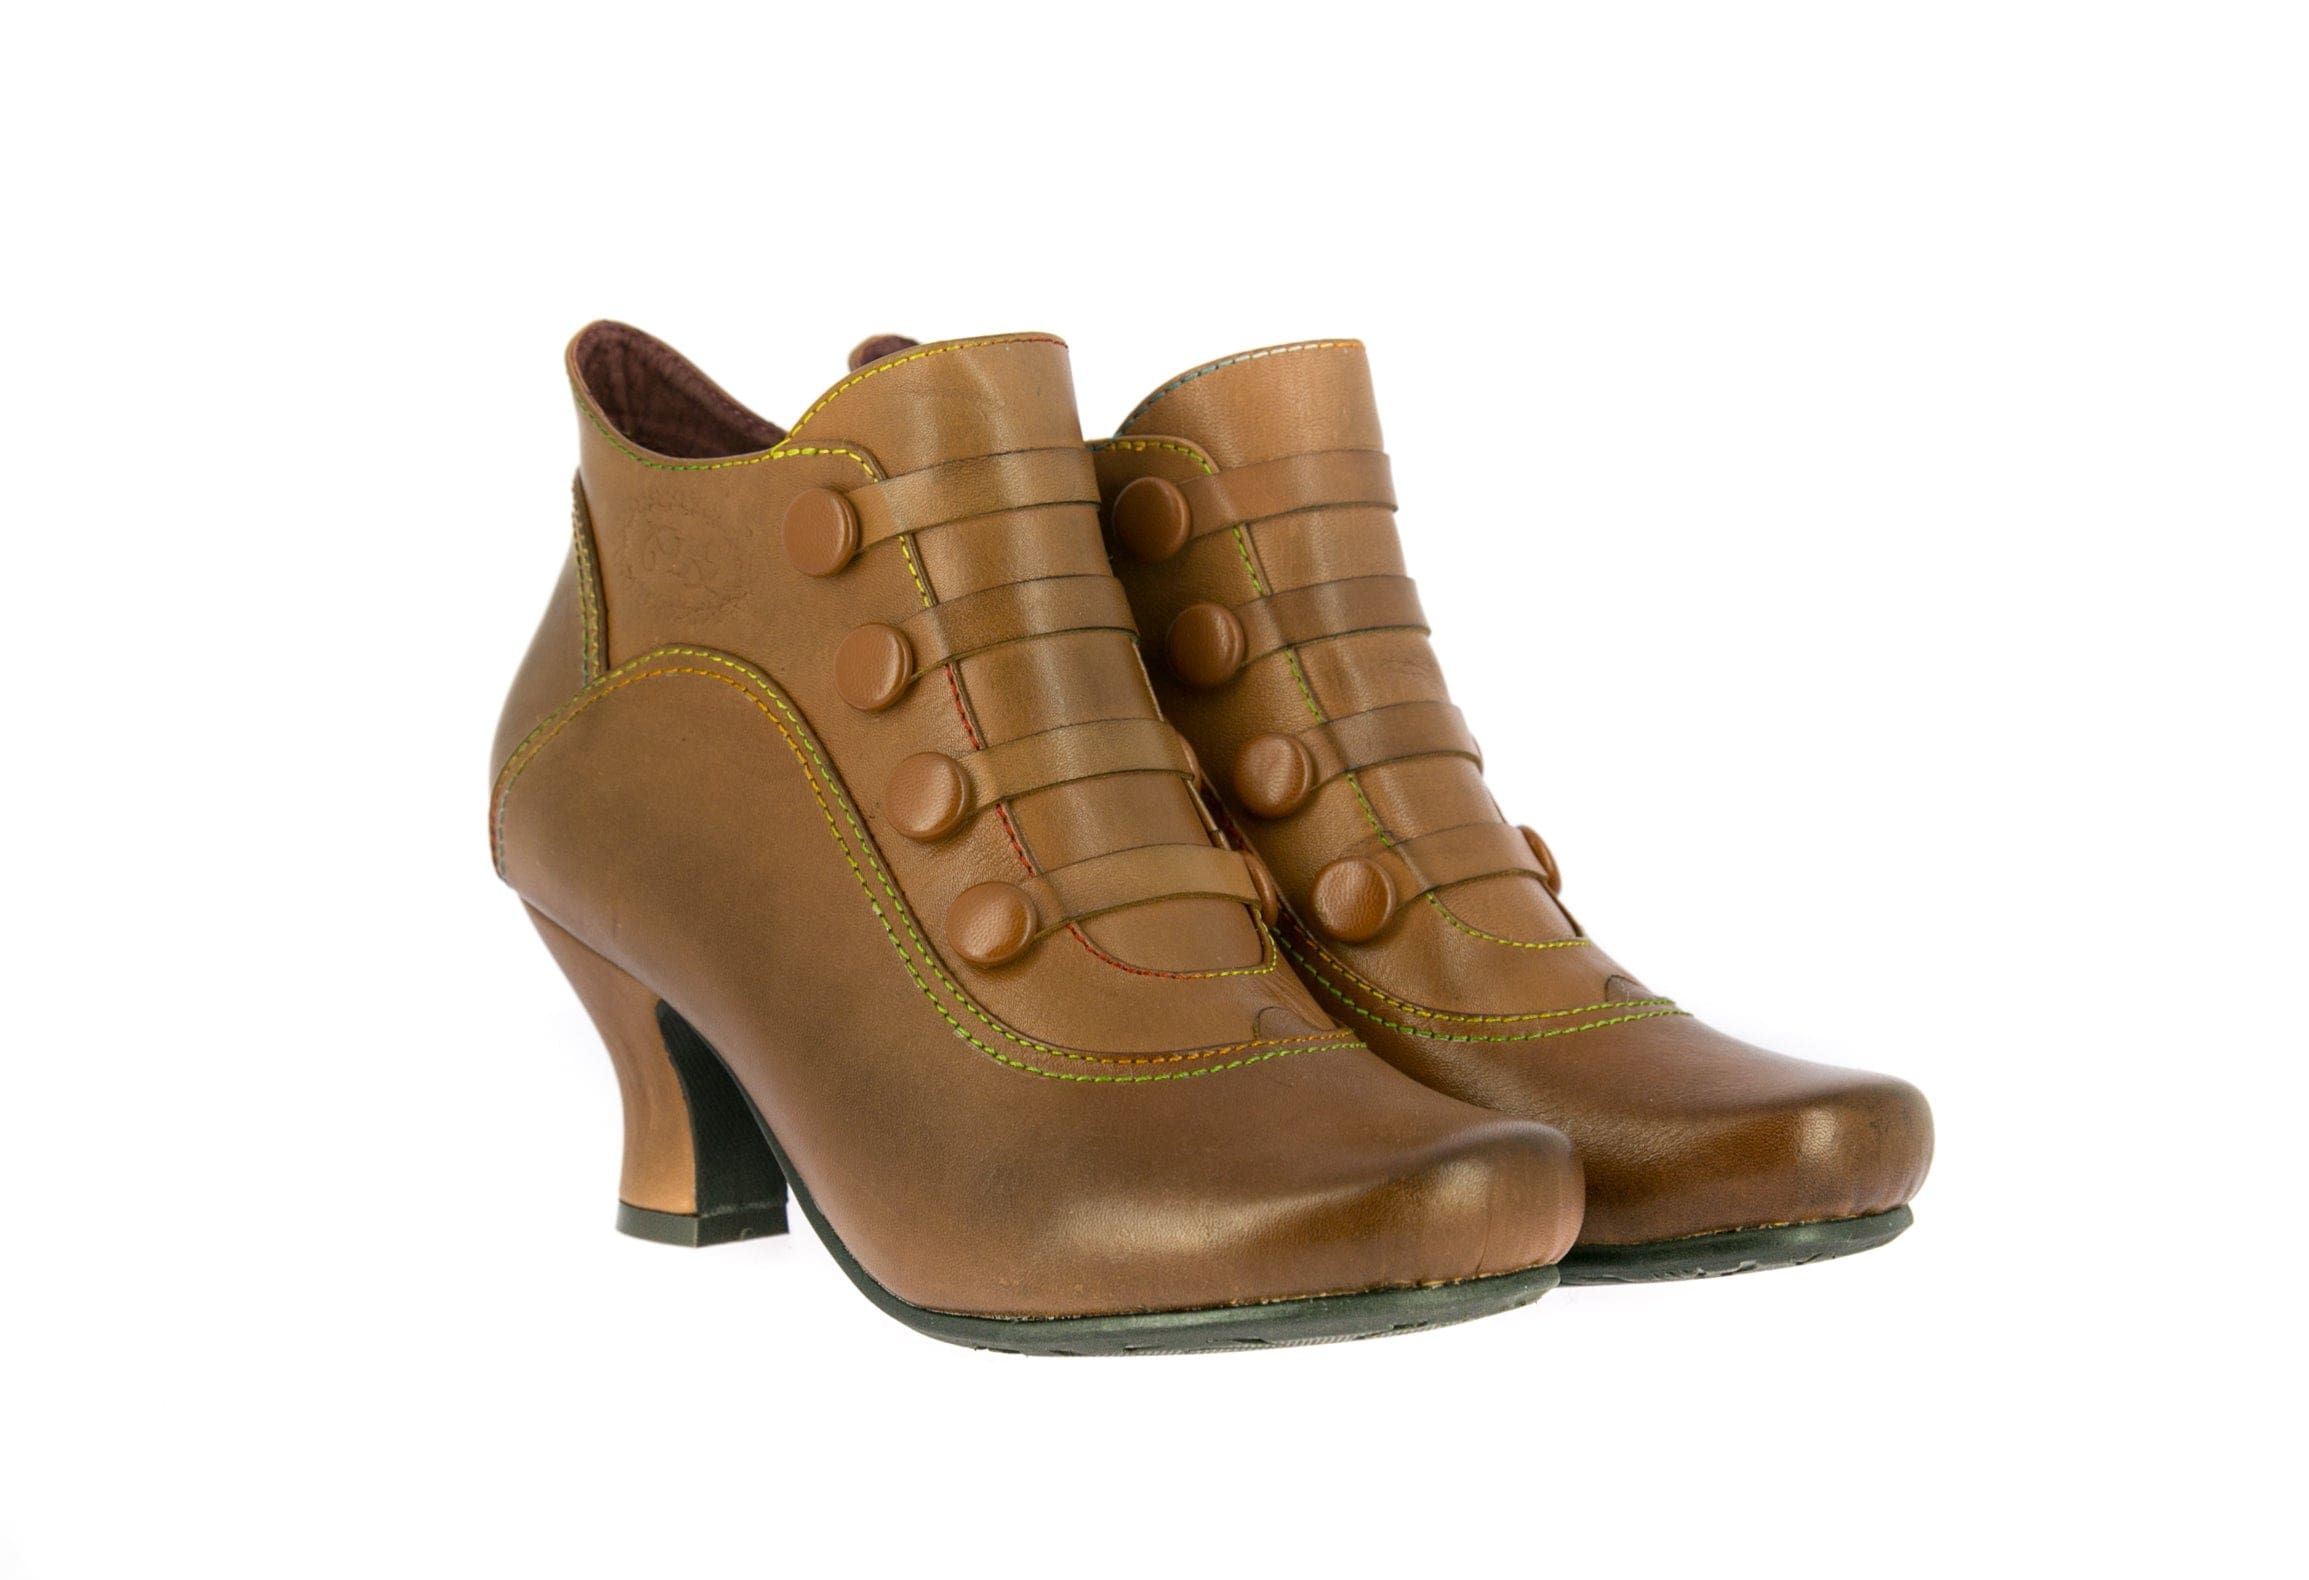 CANDICE 01 shoes - 37 / Camel - Boots